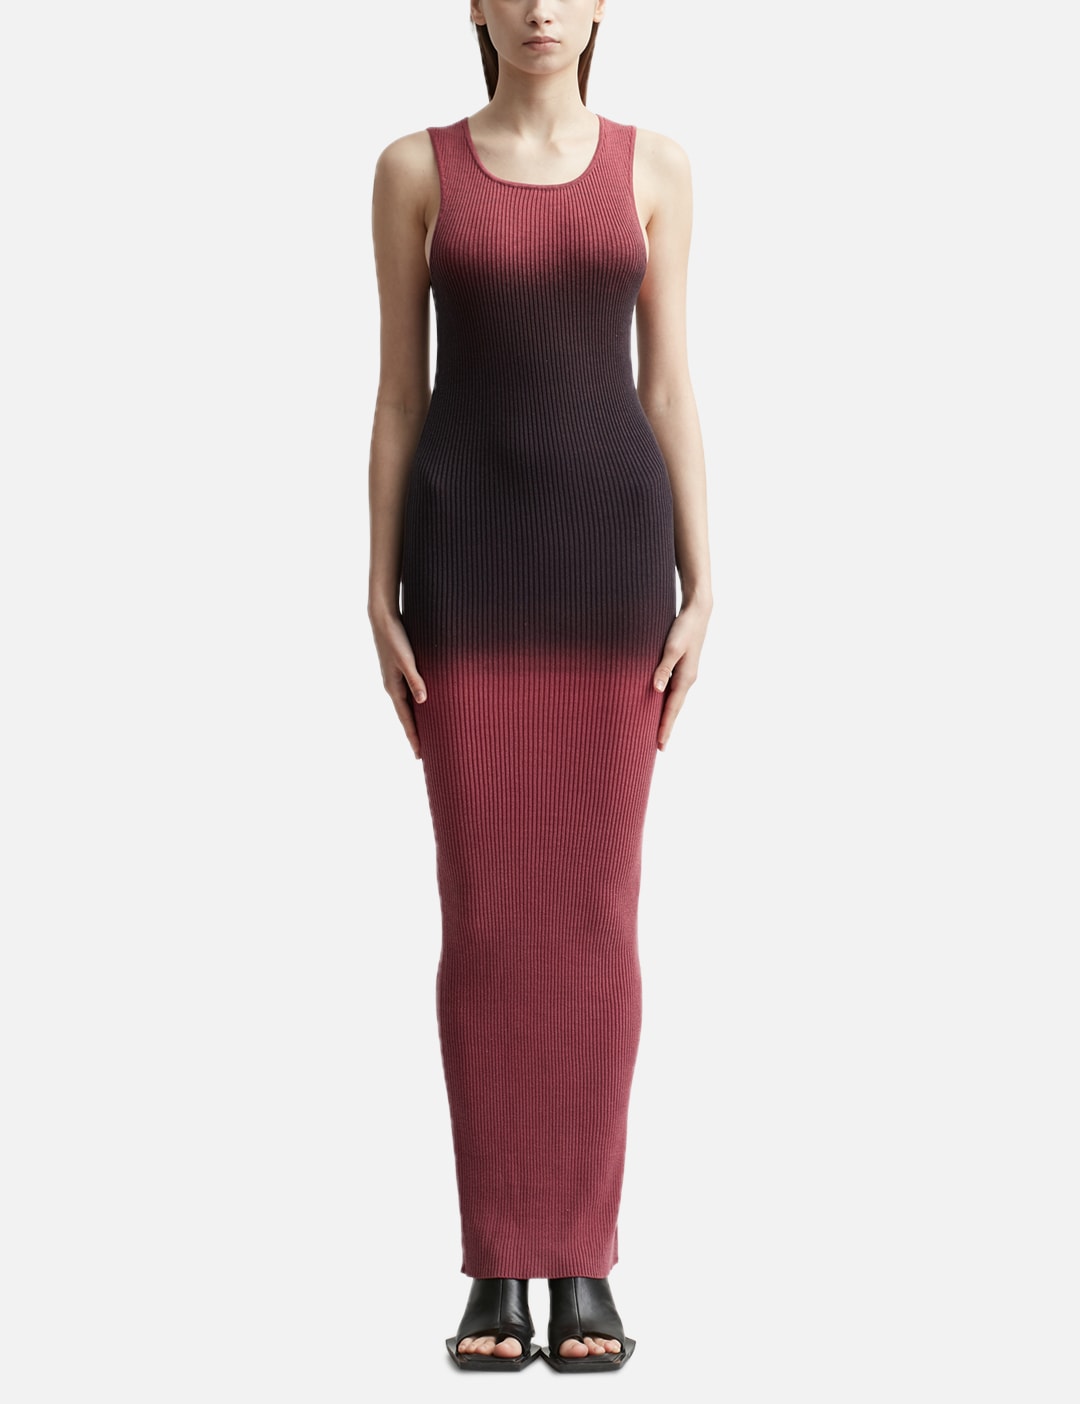 Ombre Maxi Dress Placeholder Image